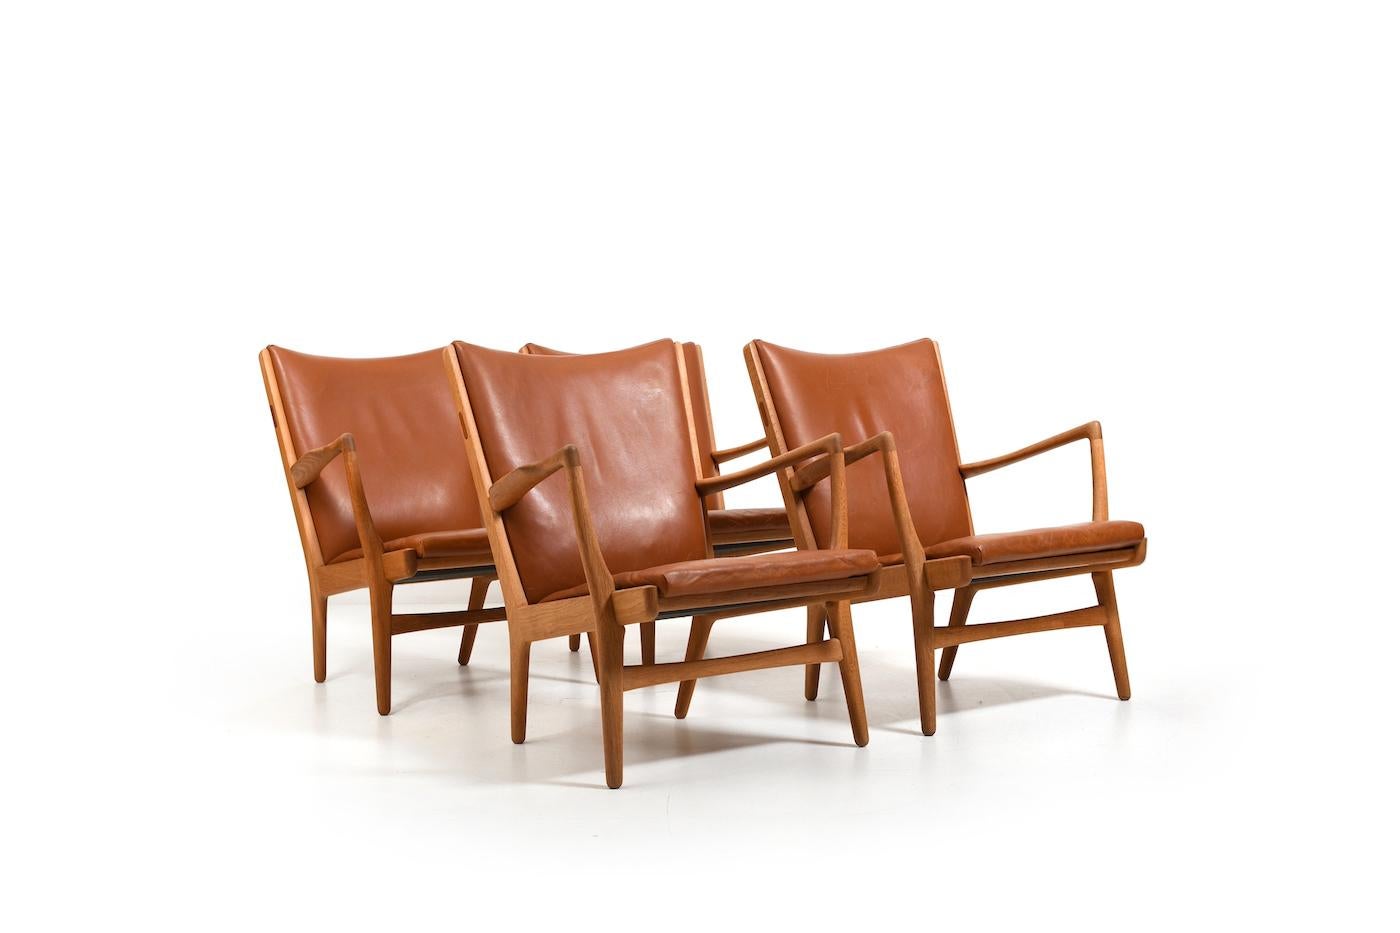 Set of four easychair, model AP-16 by Hans J. Wegner for AP Stolen Denmark 1951. Made in oak and cognac leather. Teak detail. Original cushions. Produced 1950s. Provinance: Privat collector, Cpenhagen Denmark. Comes from the same house.All in